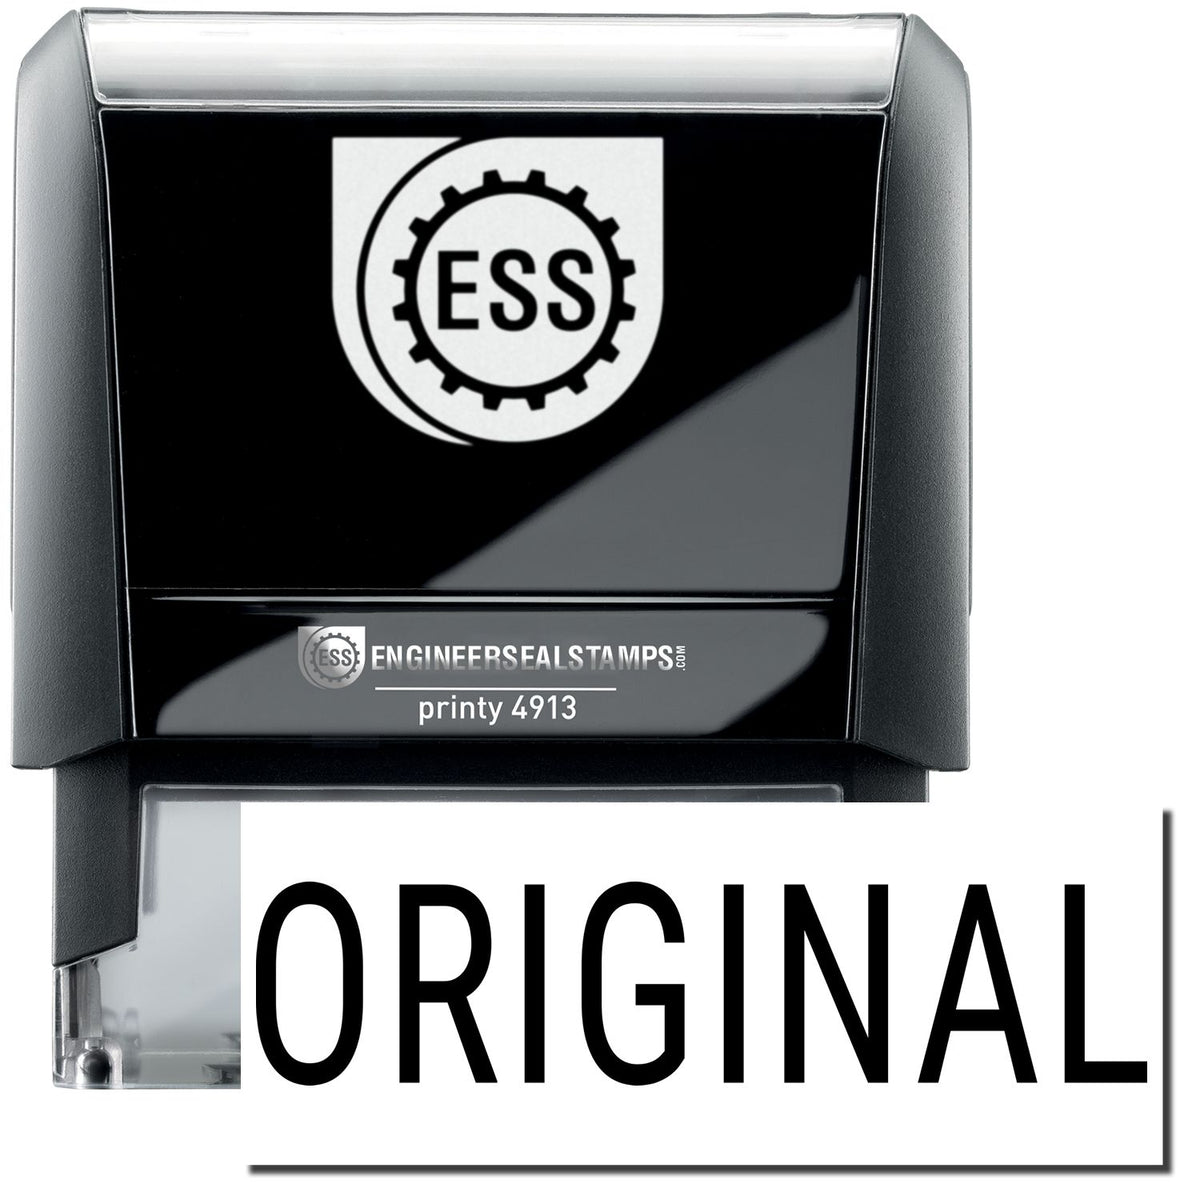 A self-inking stamp with a stamped image showing how the text &quot;ORIGINAL&quot; in a large narrow font is displayed by it after stamping.